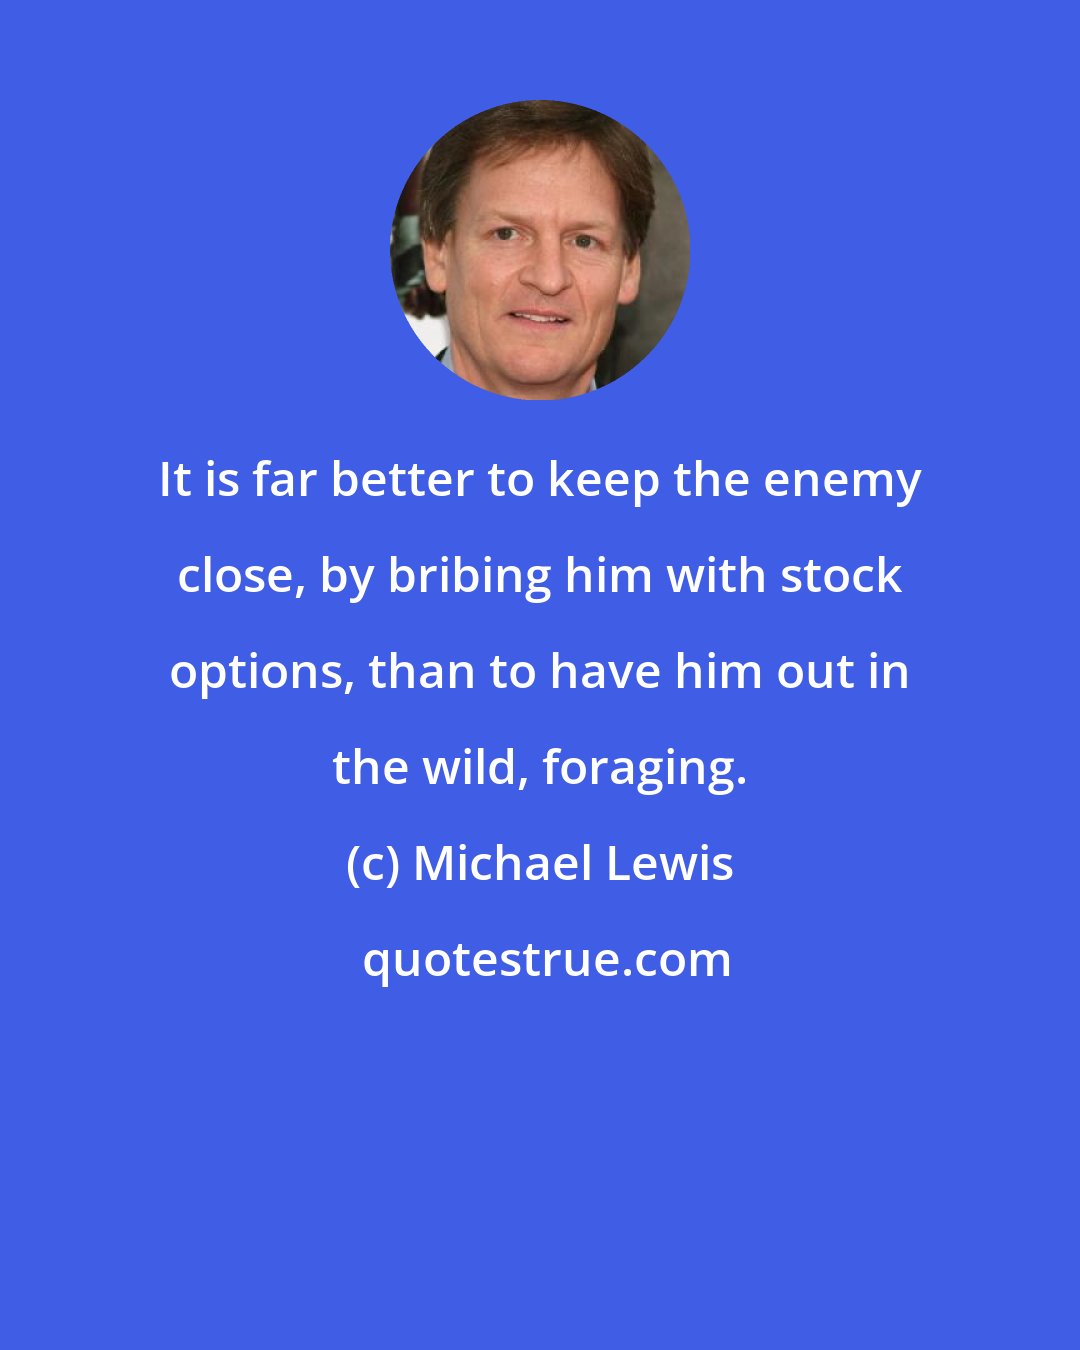 Michael Lewis: It is far better to keep the enemy close, by bribing him with stock options, than to have him out in the wild, foraging.